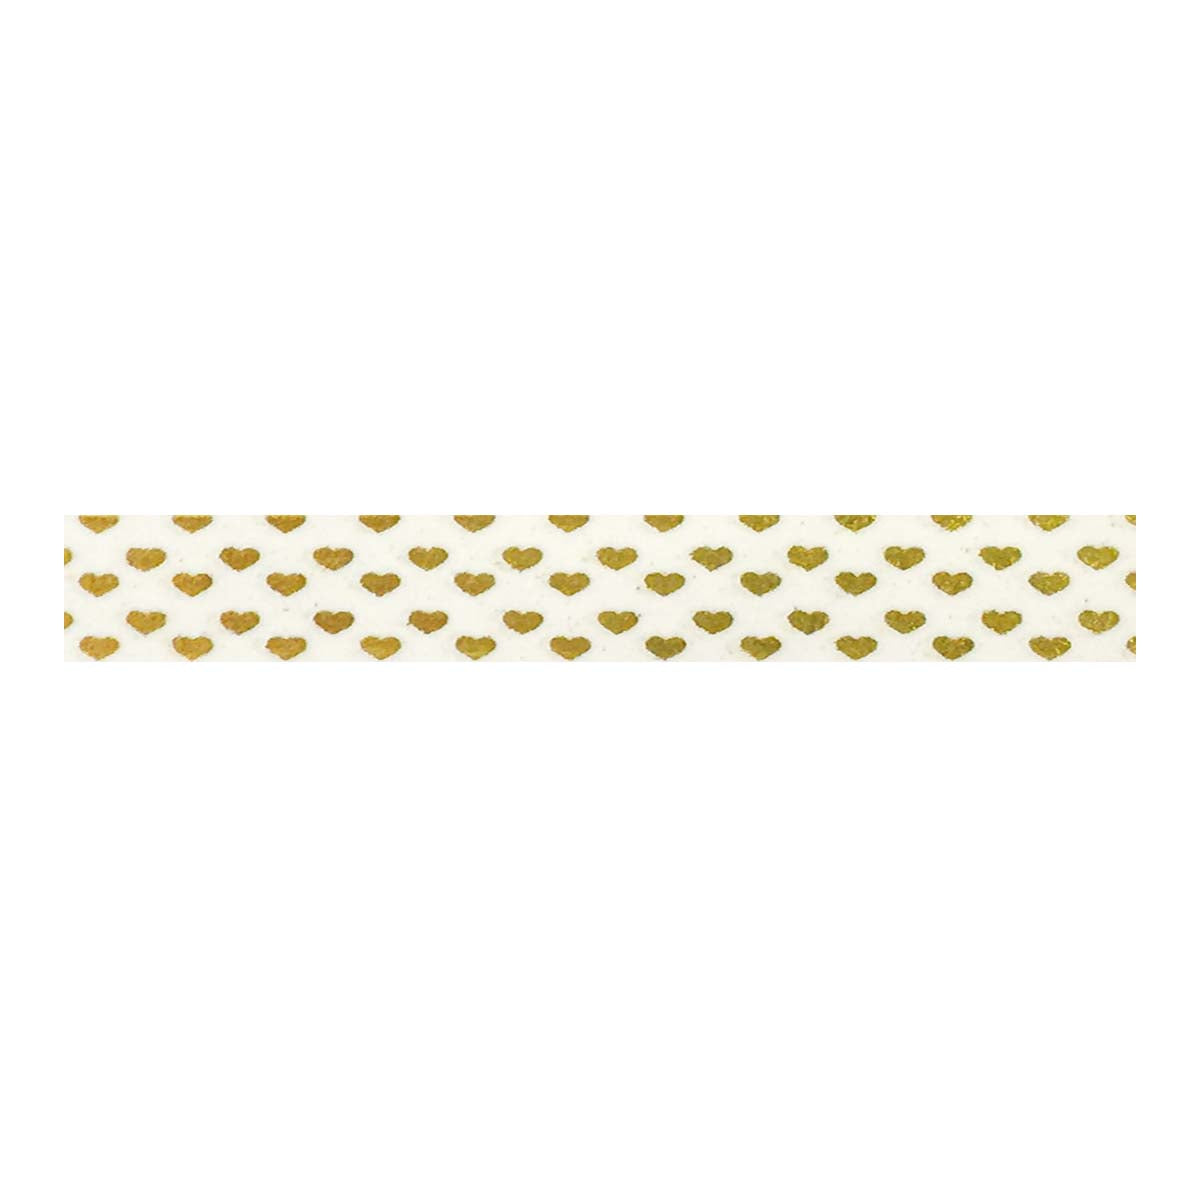 Wrapables Washi Tapes Decorative Masking Tapes, Set of 12, ADSET53, 12  pieces - Fry's Food Stores